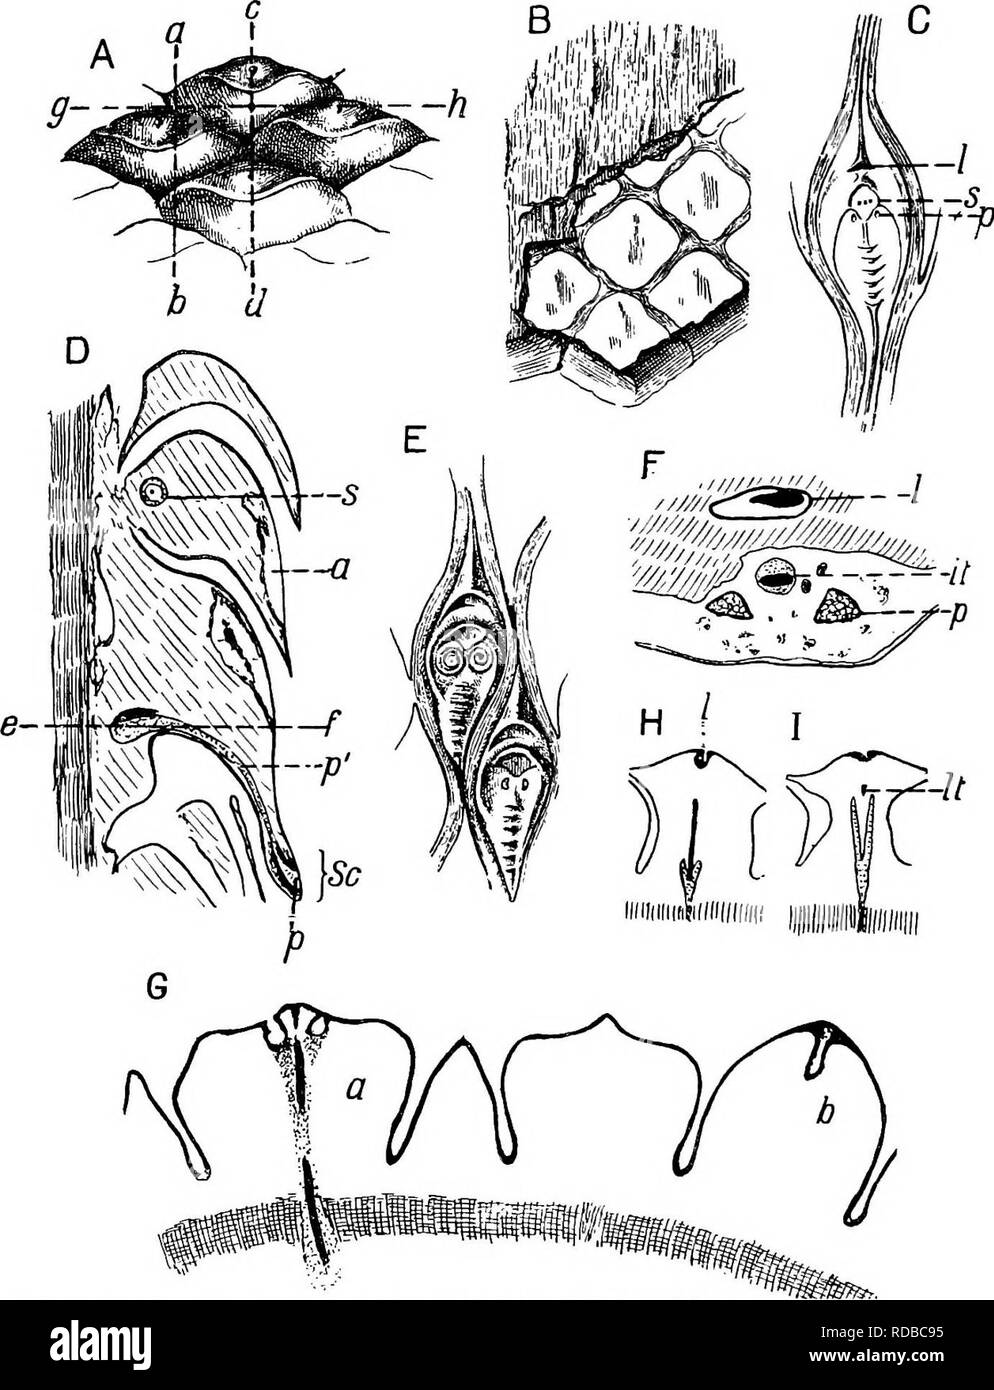 . Fossil plants : for students of botany and geology . Paleobotany. 104 LYCOPODIALES ill ' [CH.. Fig. 146. Lepidophloios and Lepidodendron leaf-cushions. A, B, D, P, G, H, I. Lepidophloios. (Fig. A should be reversed.) C, E. Lepidodendron aculeatum. A, B. From a specimen in the Sedgwick Museum, Cambridge (leaf- cushion 3 cm. broad). C. From a specimen in the Sedgwick Museum, Cambridge (leaf- cushion 4 cm. long. D. From a section in the Cambridge Botany School Collection. E. From a specimen in the Bunbury Collection, Cambridge Botany School, showing Spirorbis shells (leaf-cushion 2 cm. long). F Stock Photo